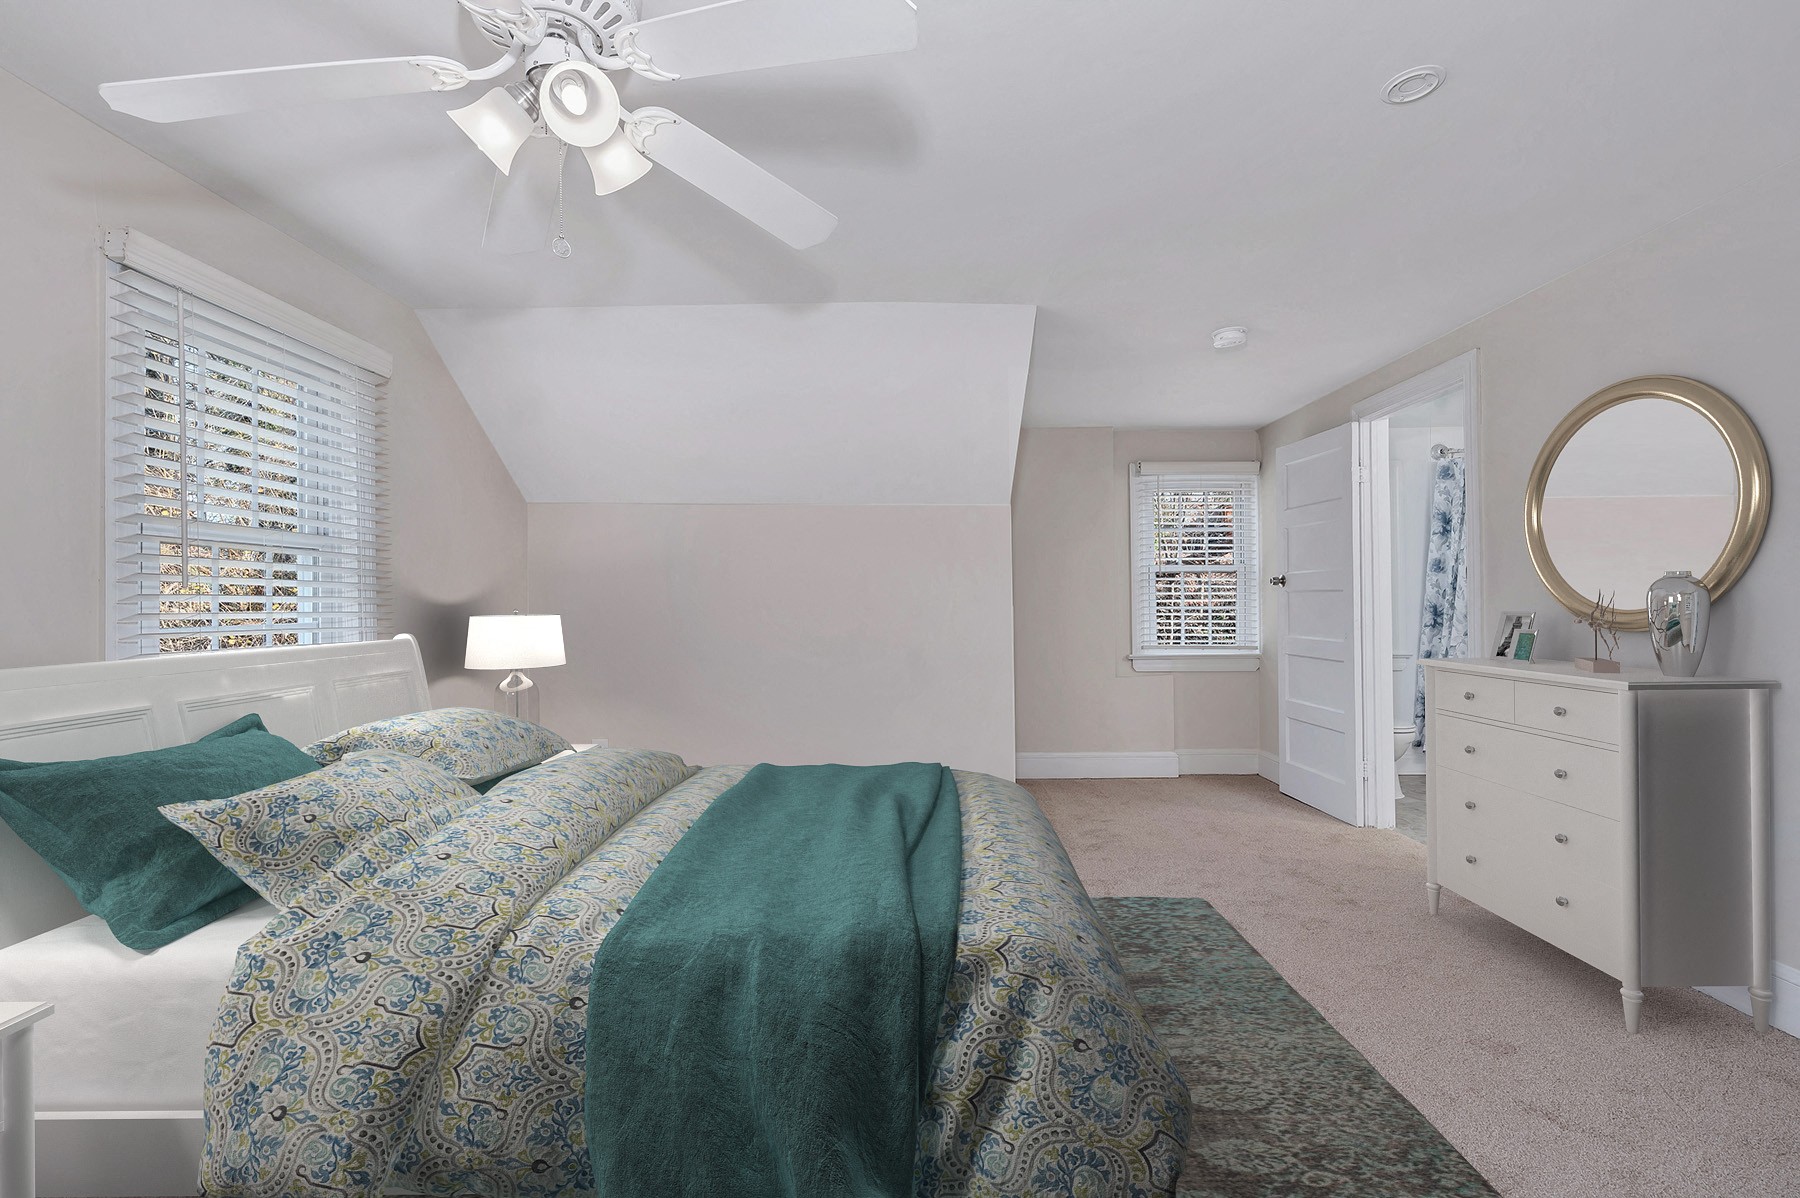 King size bedroom with ceiling fan